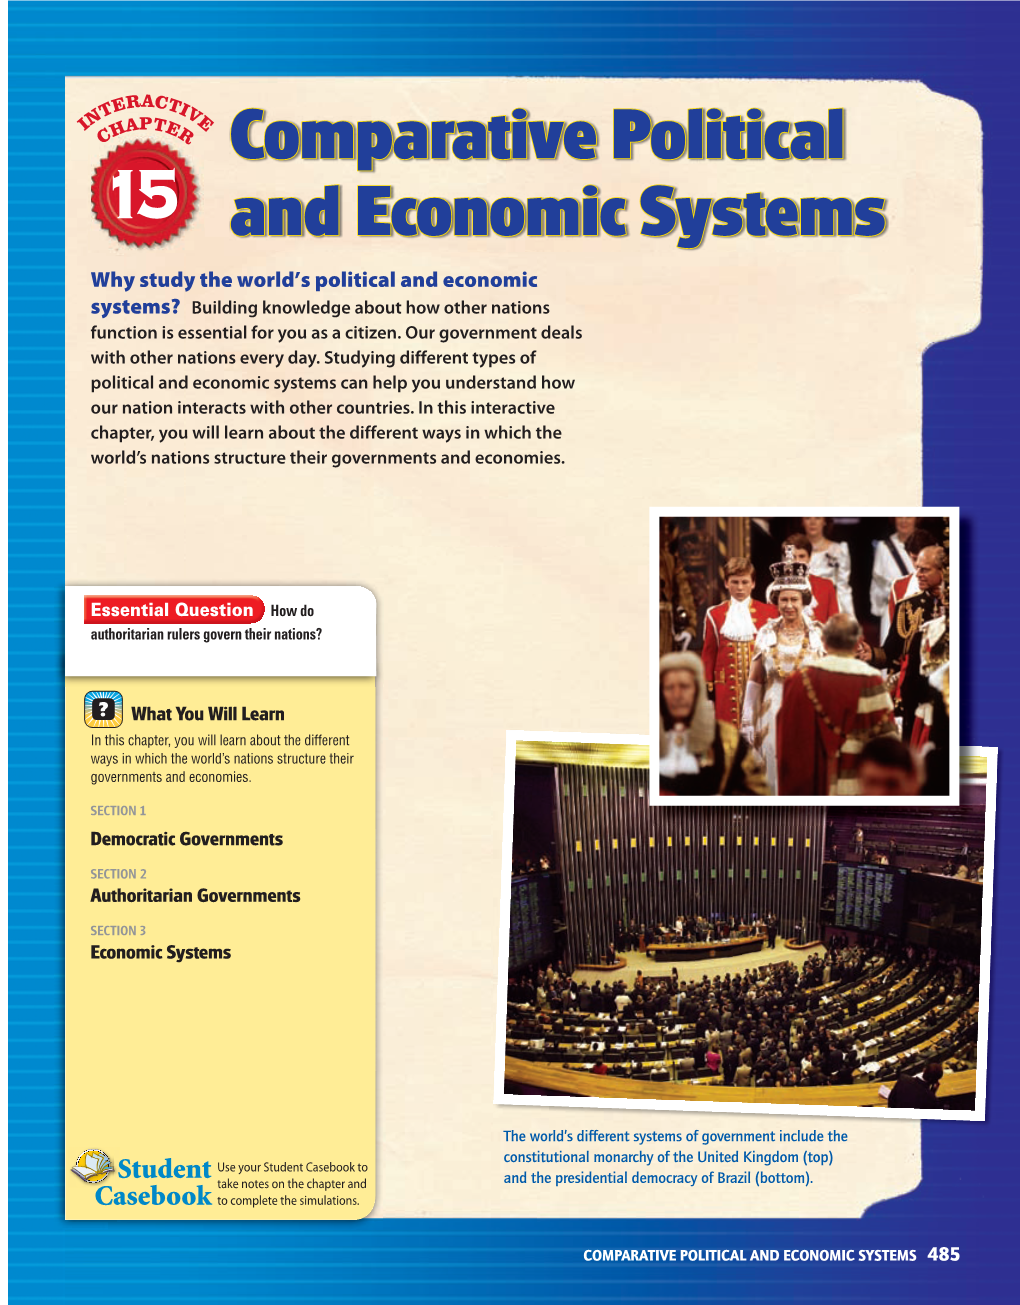 Comparative Political and Economic Systems 485